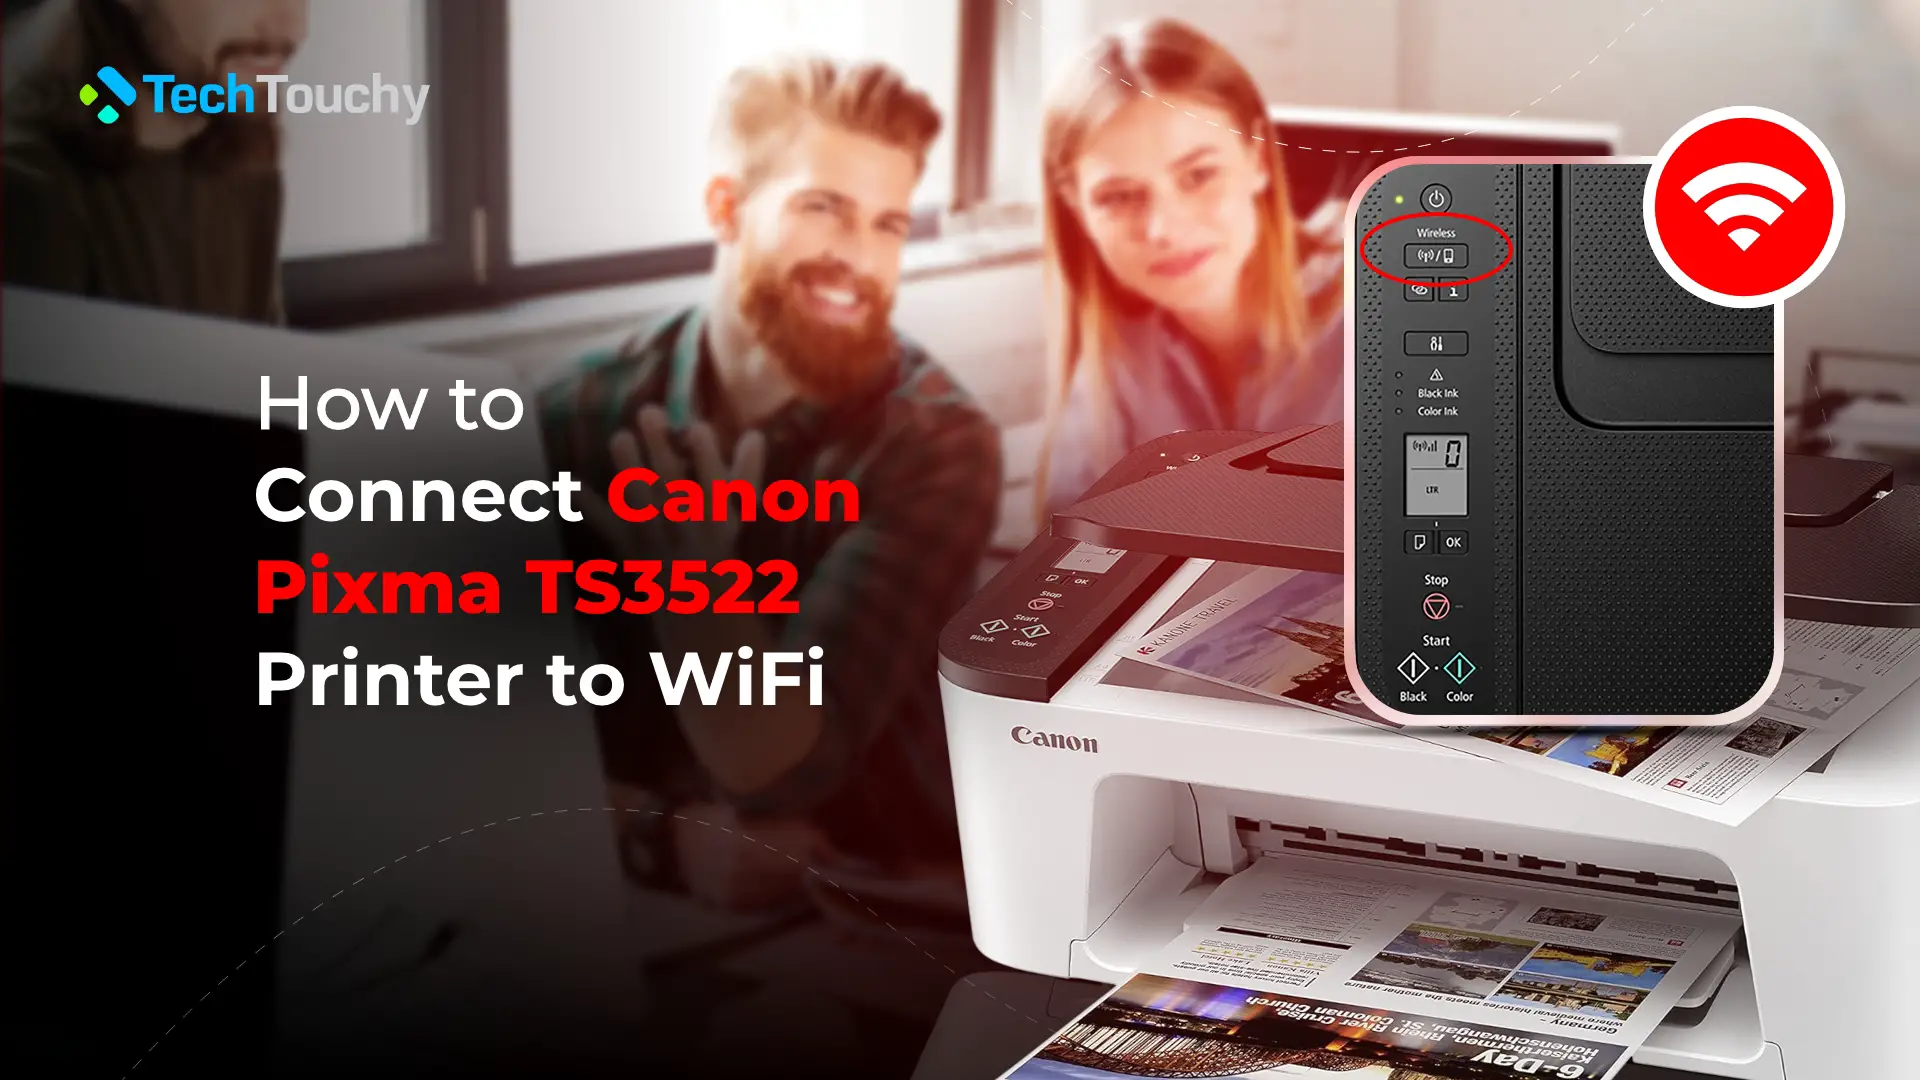 How to Connect Canon Pixma TS3522 Printer to WiFi – Full Guide